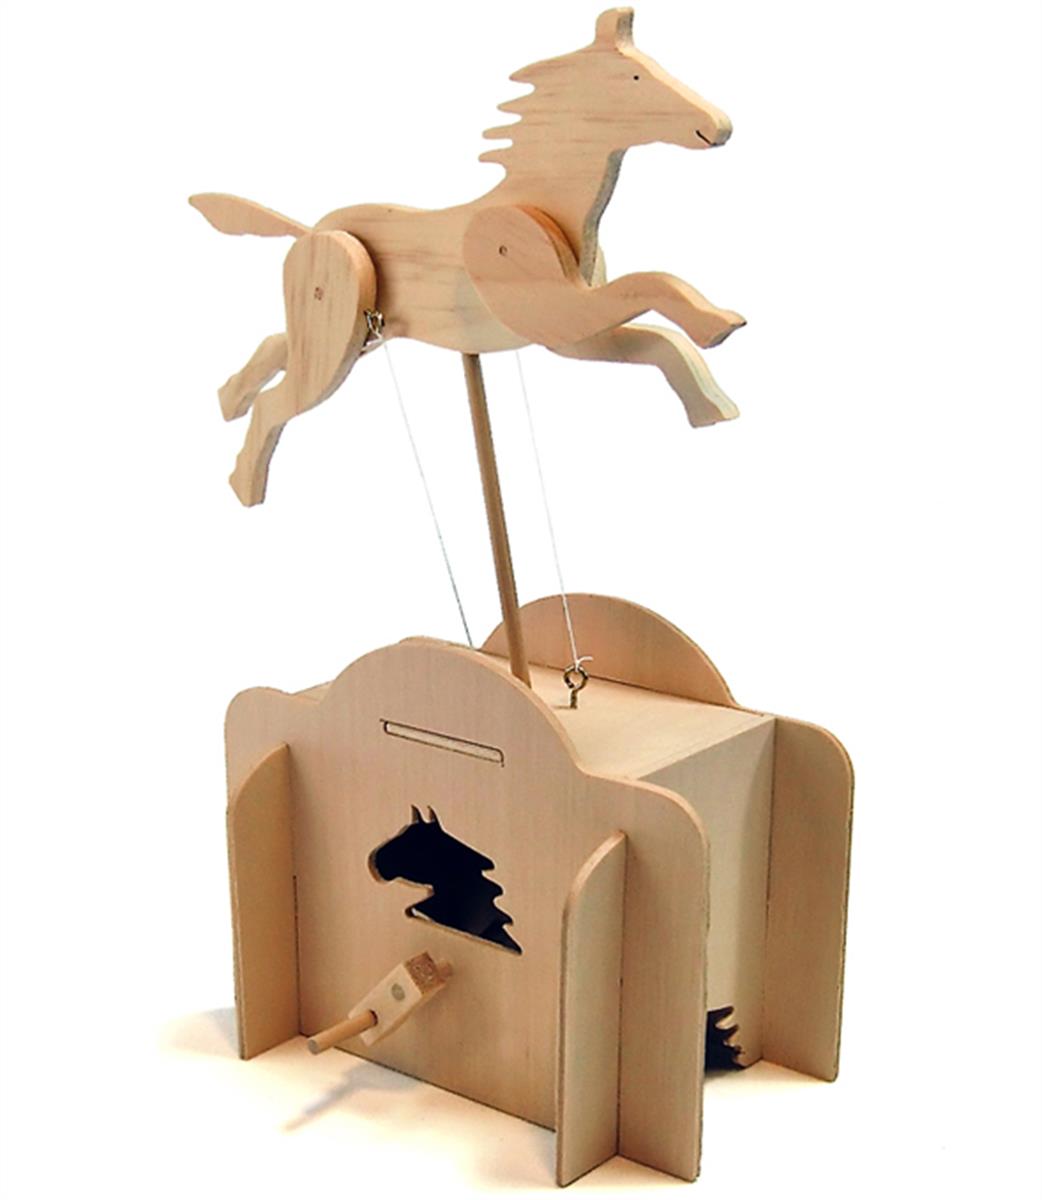 Pathfinder 26317 Automata Make Your Own Running Horse Wooden Kit